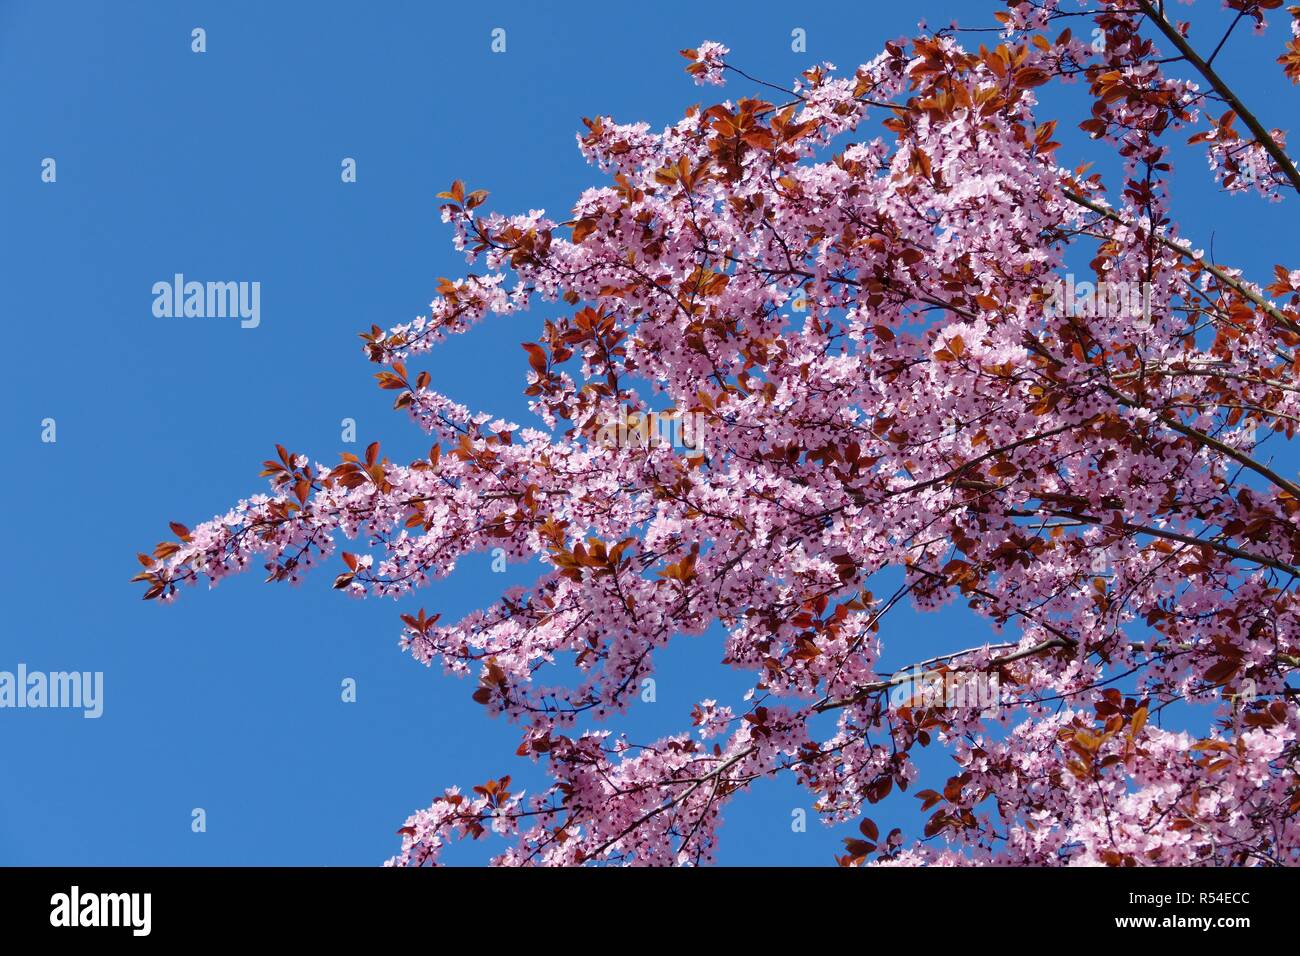 Blutpflaume hi-res stock photography Alamy - and images